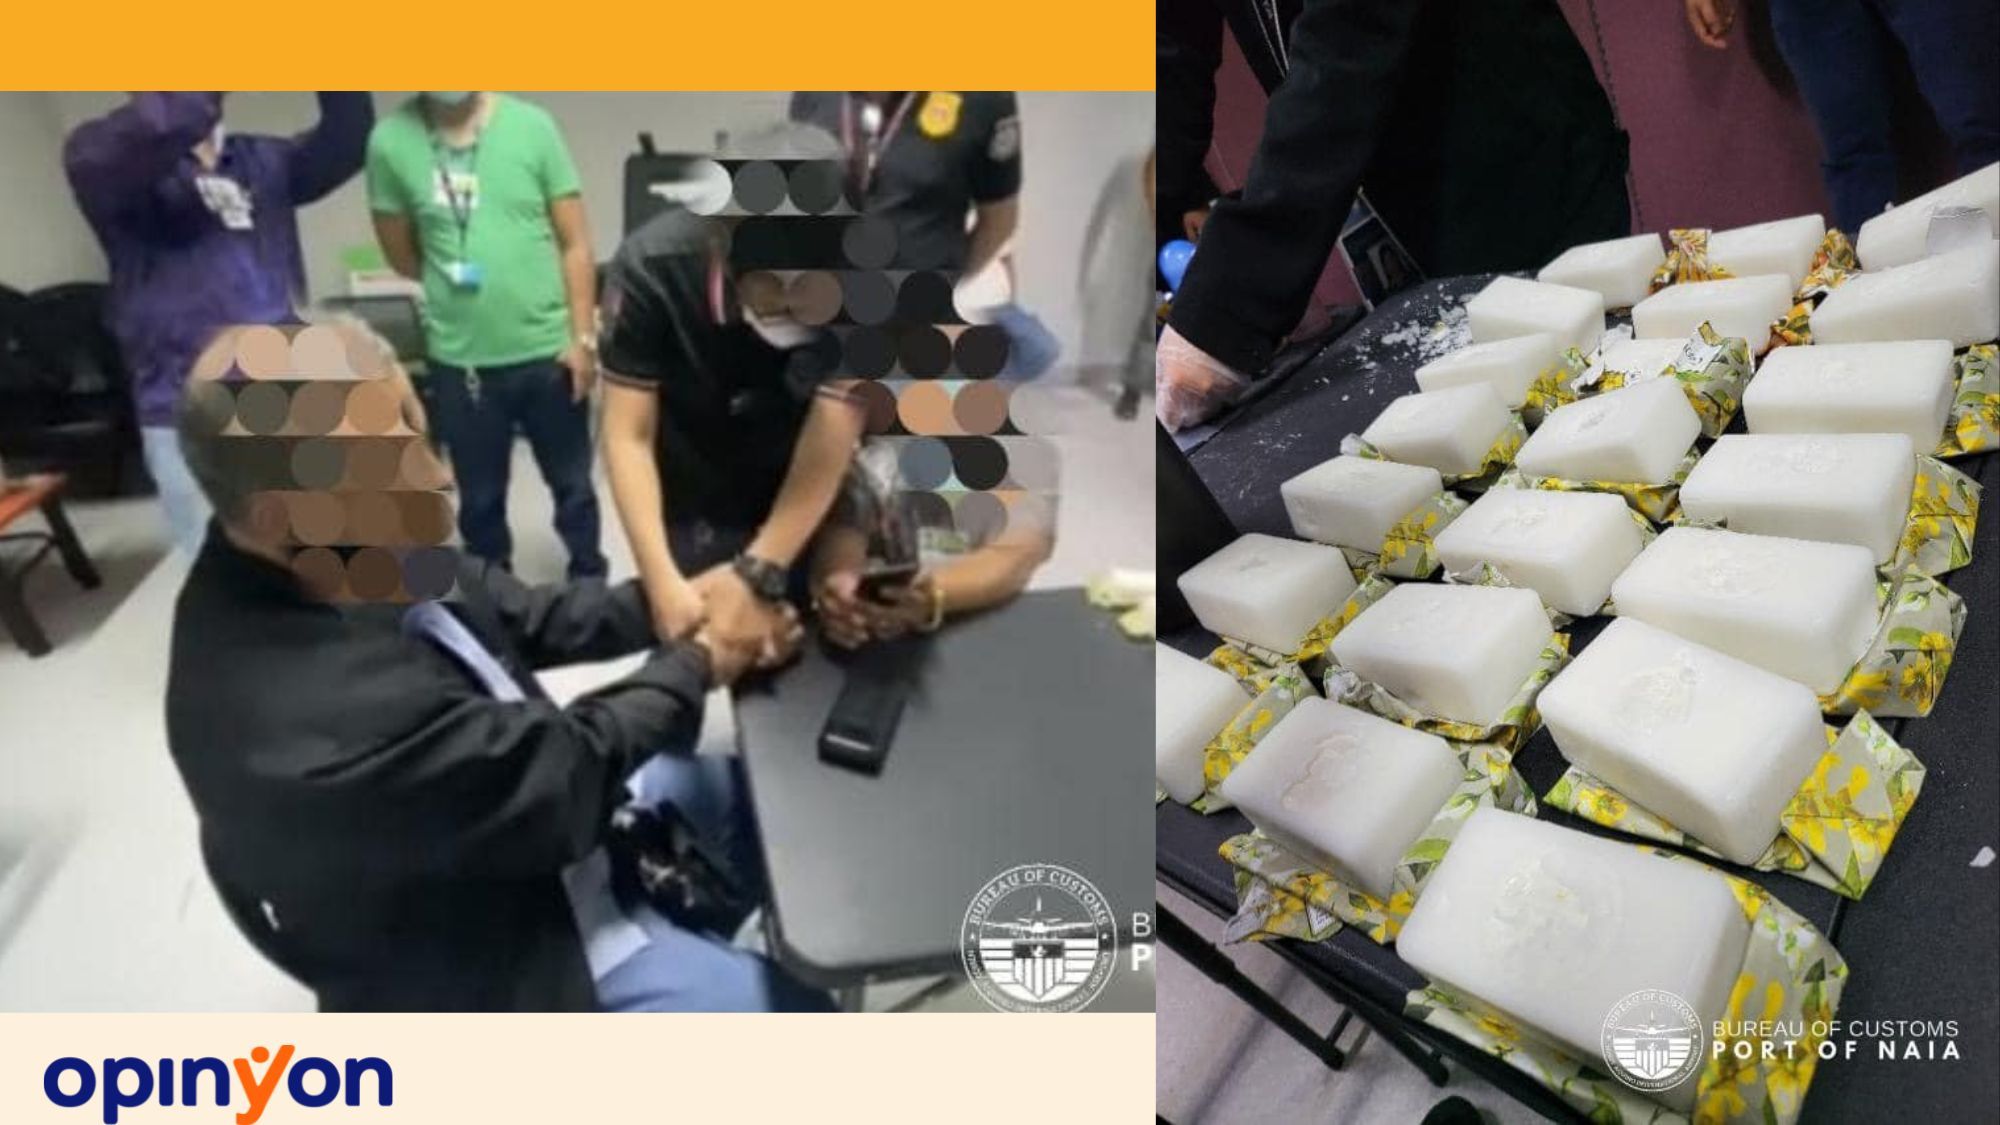 Cocaine packages found in foreigner's luggage